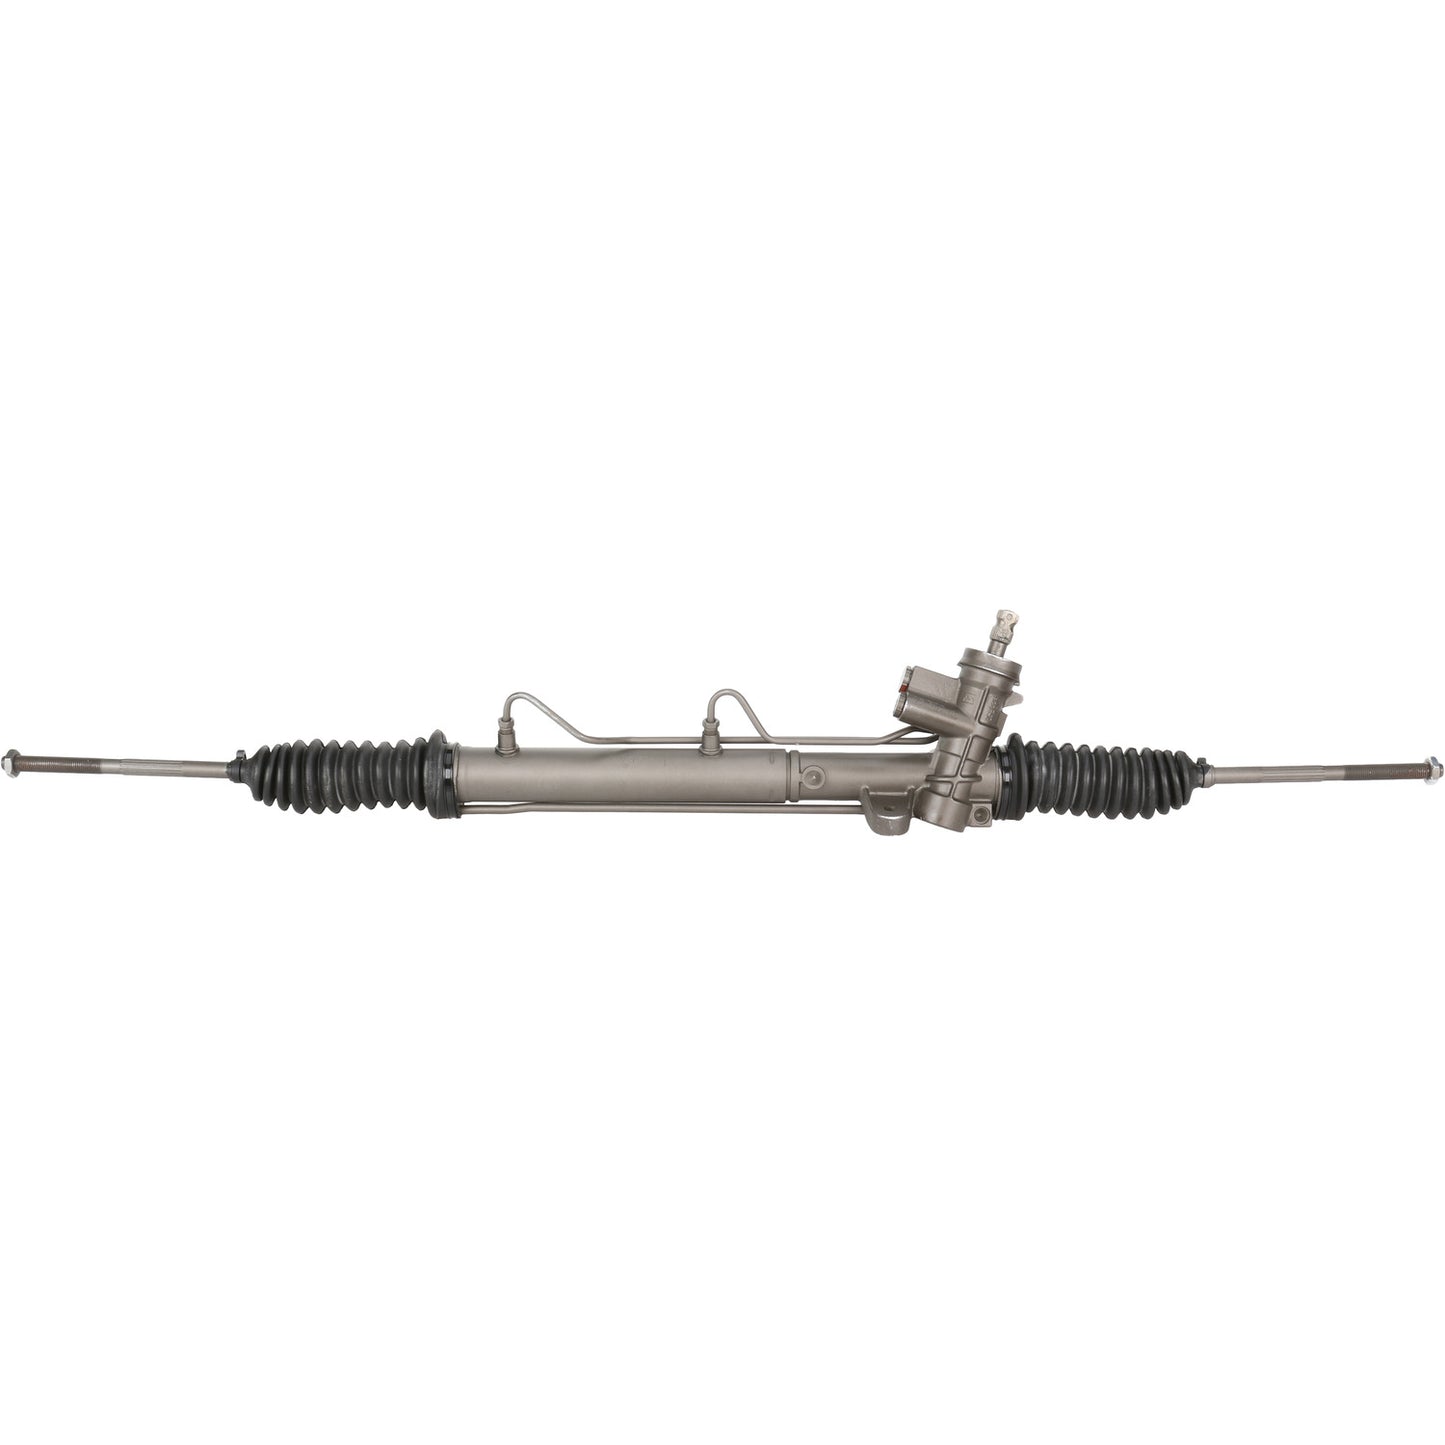 Rack and Pinion Assembly - MAVAL - Hydraulic Power - Remanufactured - 95382M